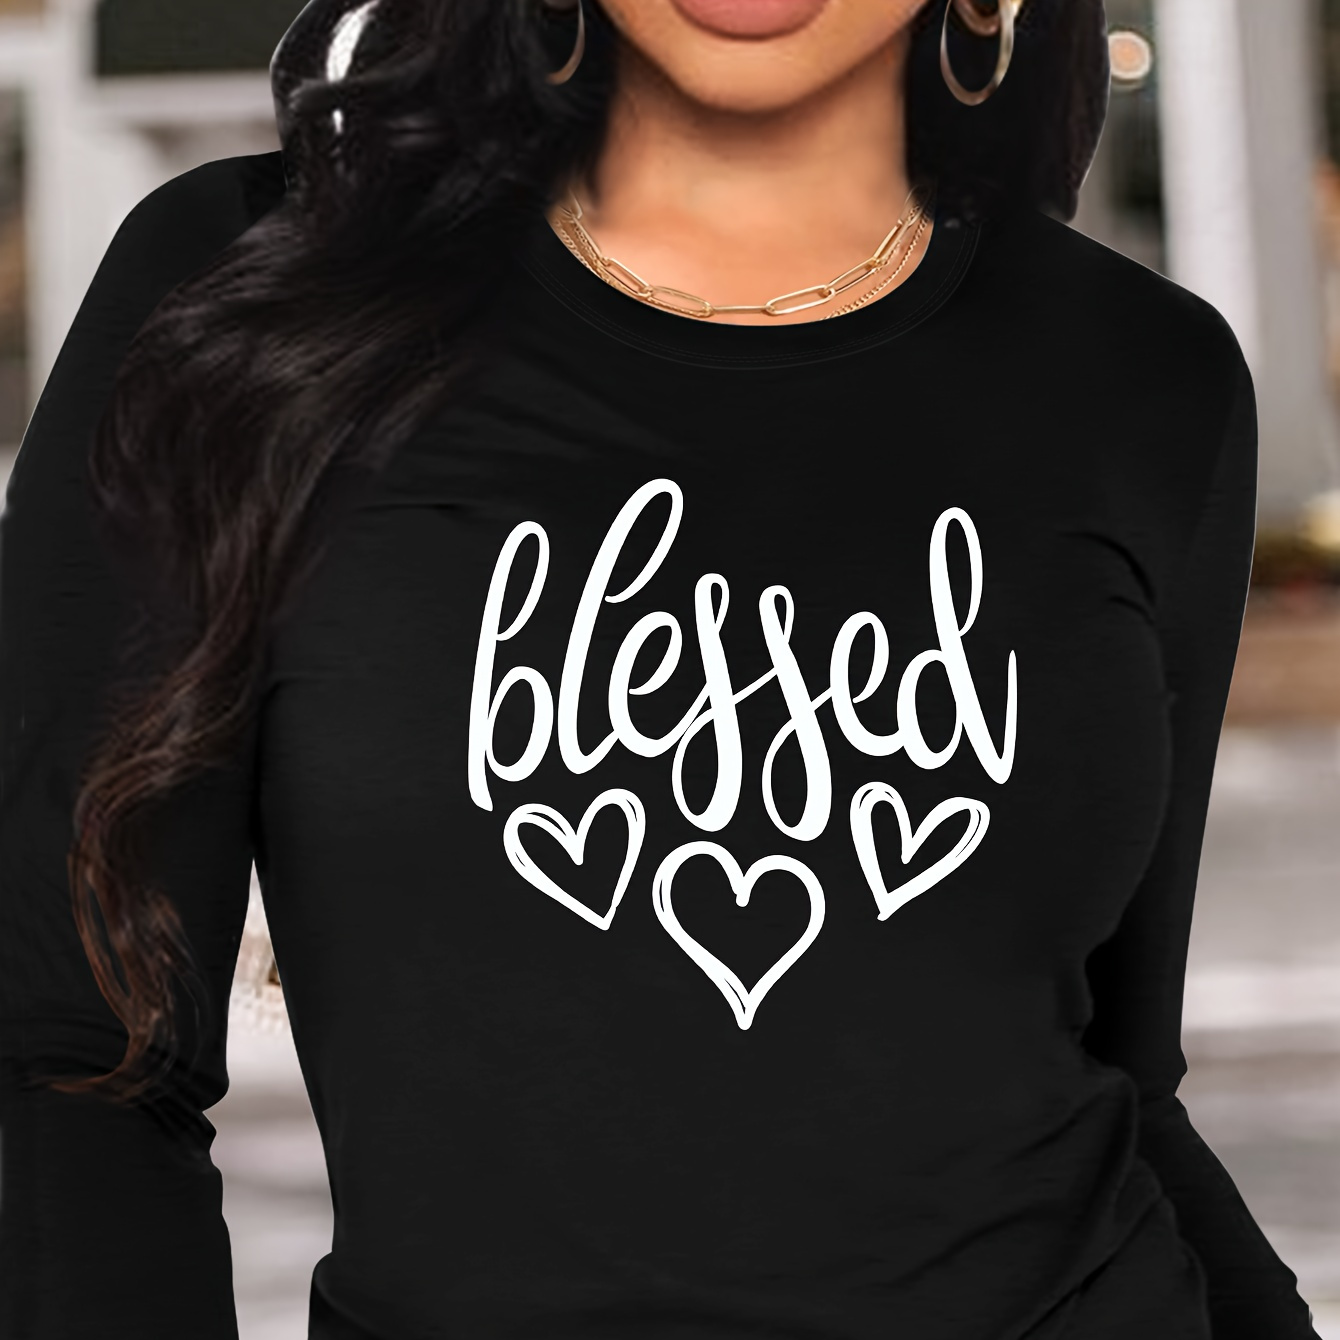 

Blessed & Heart Print T-shirt, Long Sleeve Crew Neck Casual Top For Spring & Fall, Women's Clothing